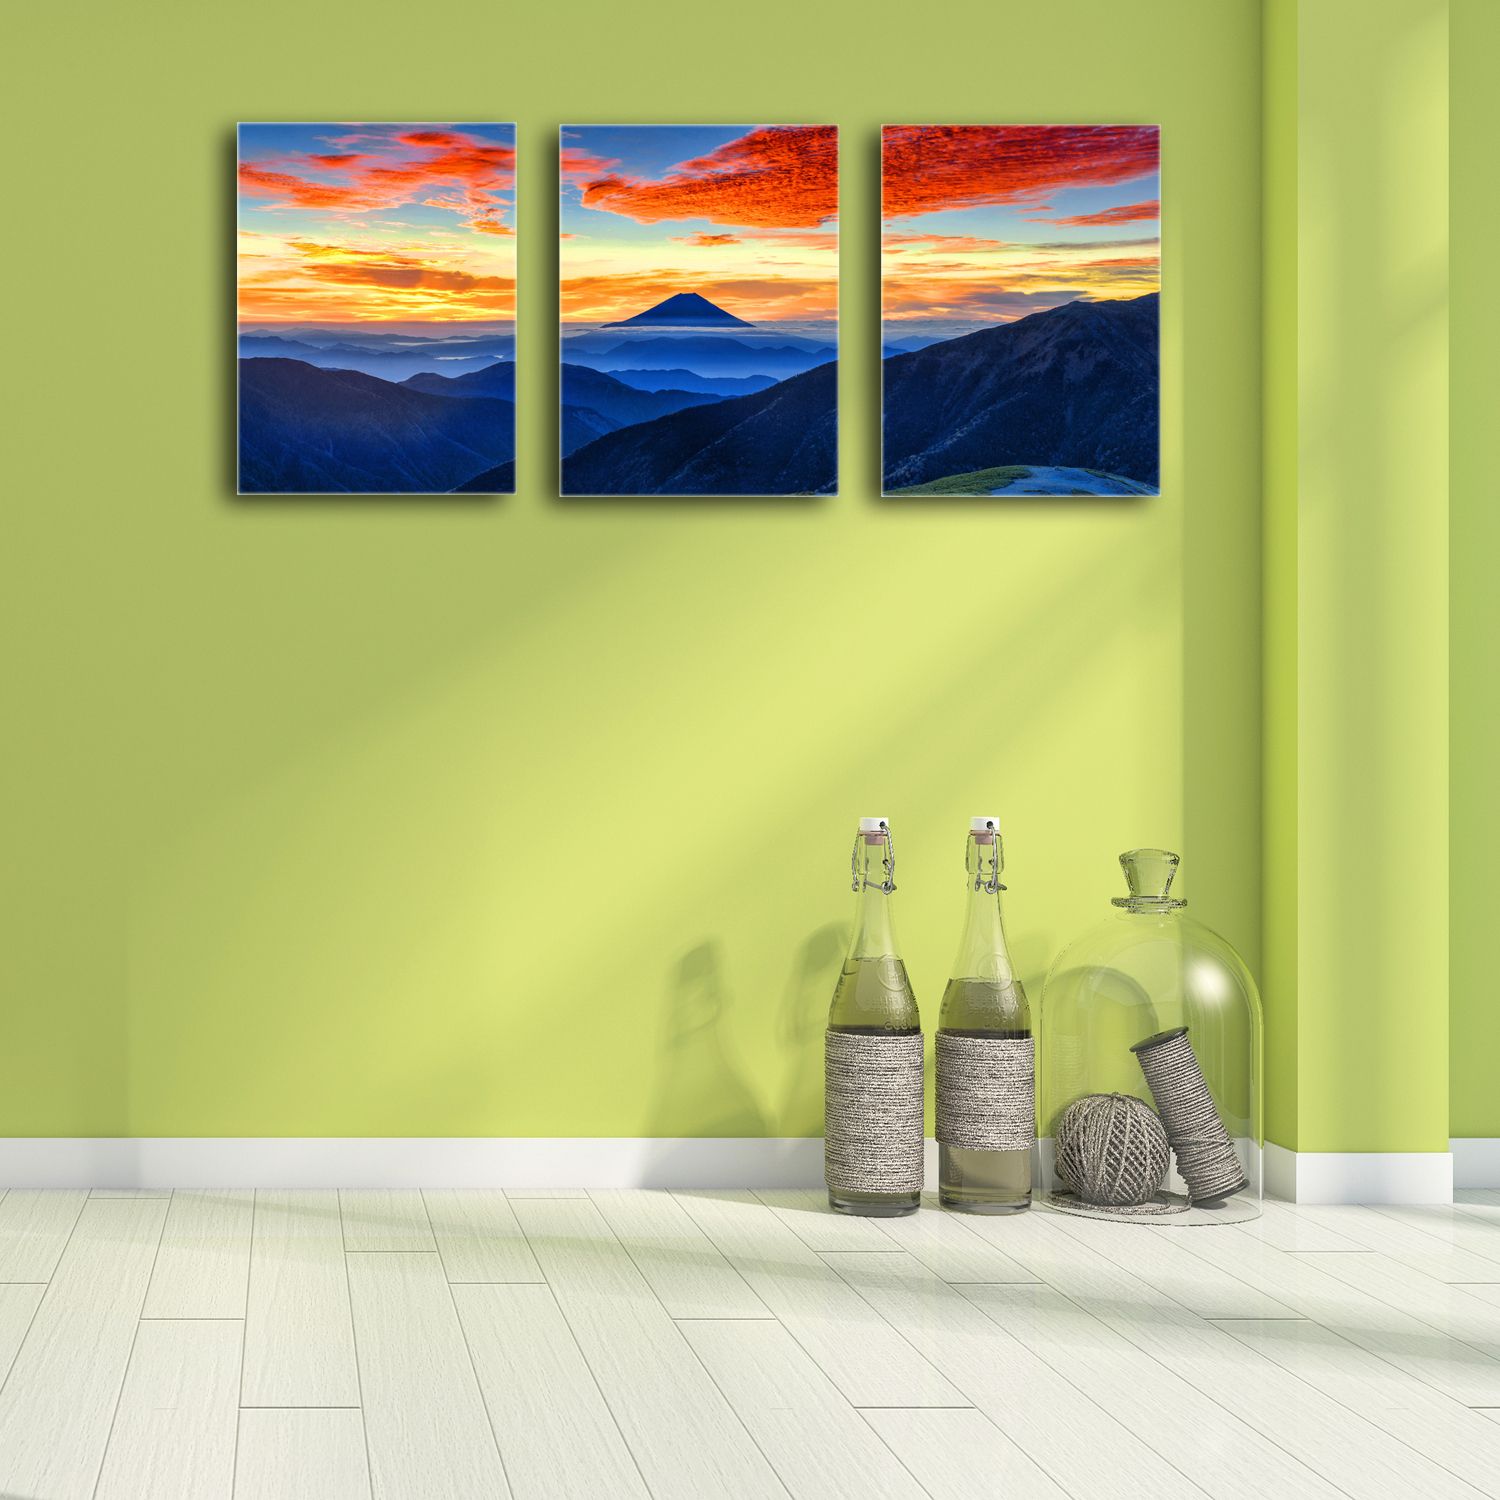 3 Panels 30x40cm Modern Home Office Wall Art Canvas In Best And Newest Natural Framed Art Prints (View 5 of 20)